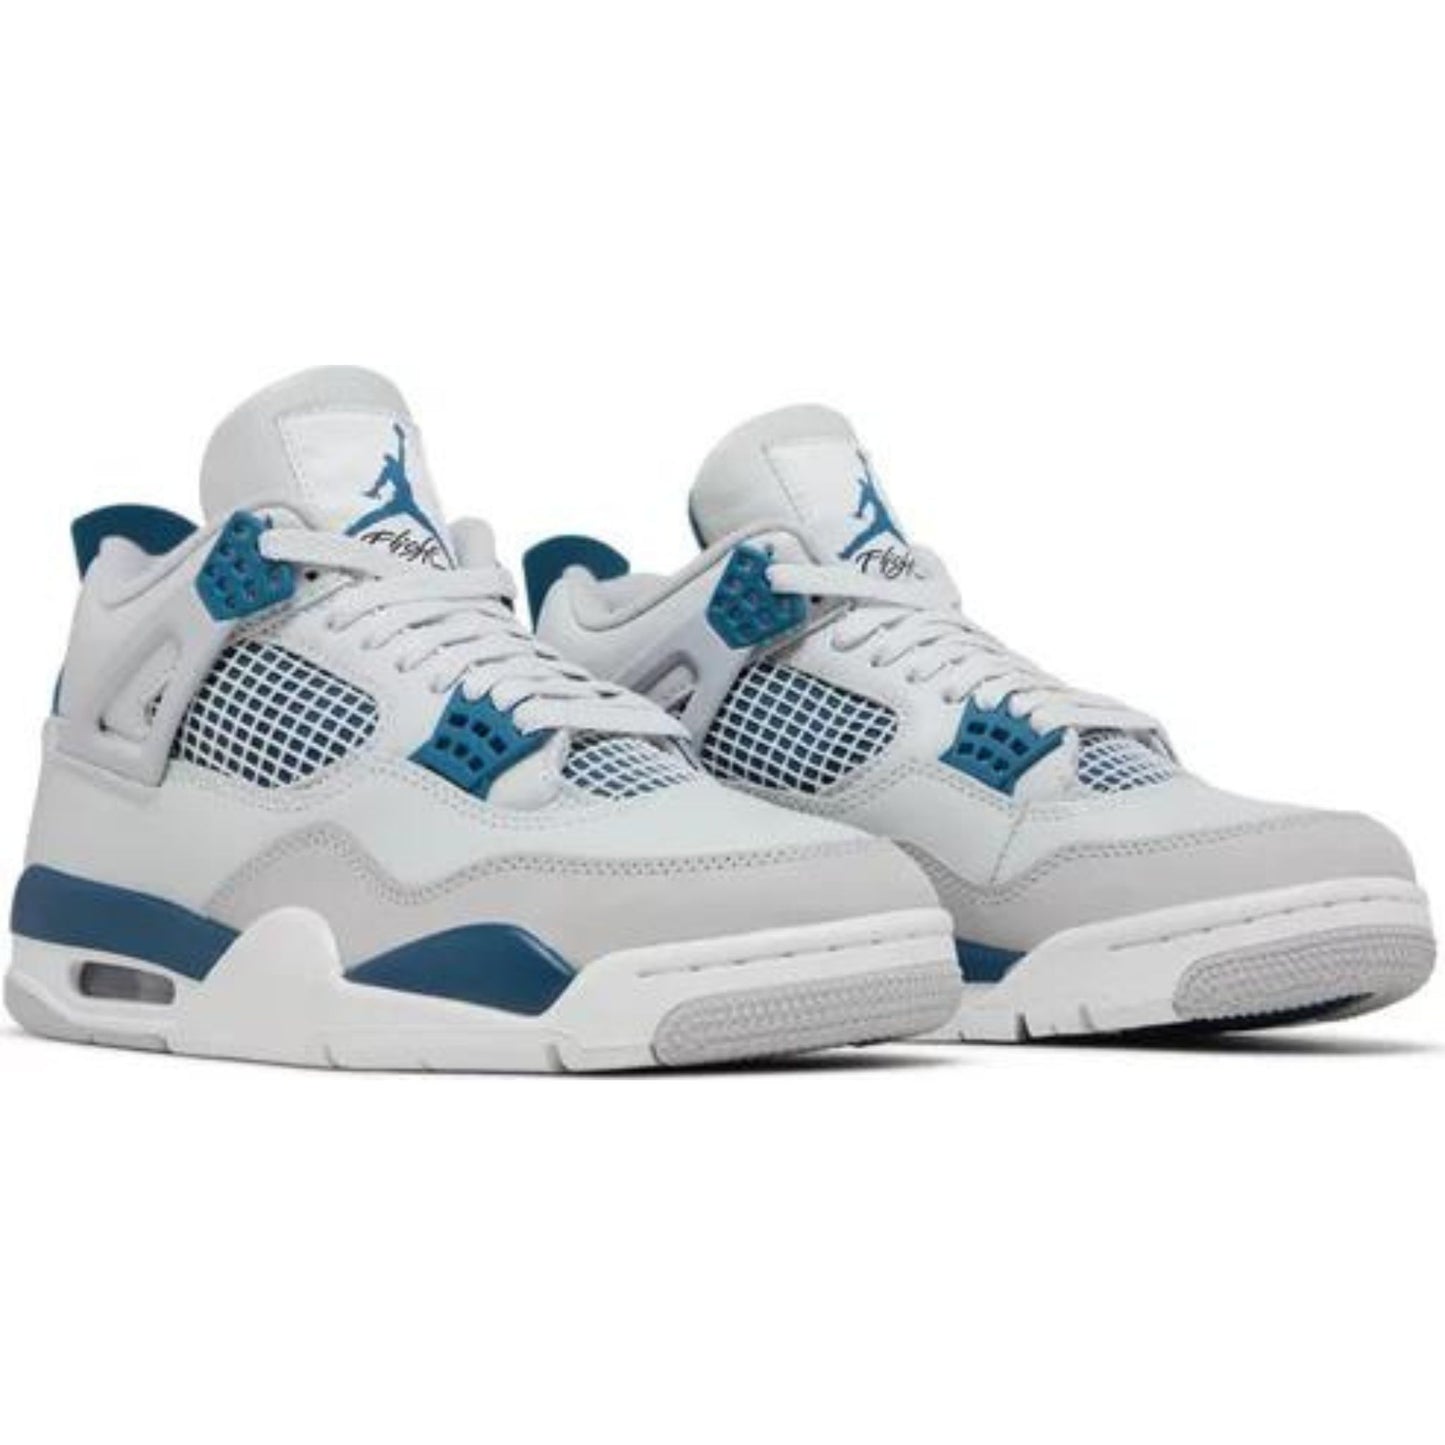 White and blue Air Jordan 4 Retro sneakers, iconic design with visible Air cushioning and Jumpman logo.